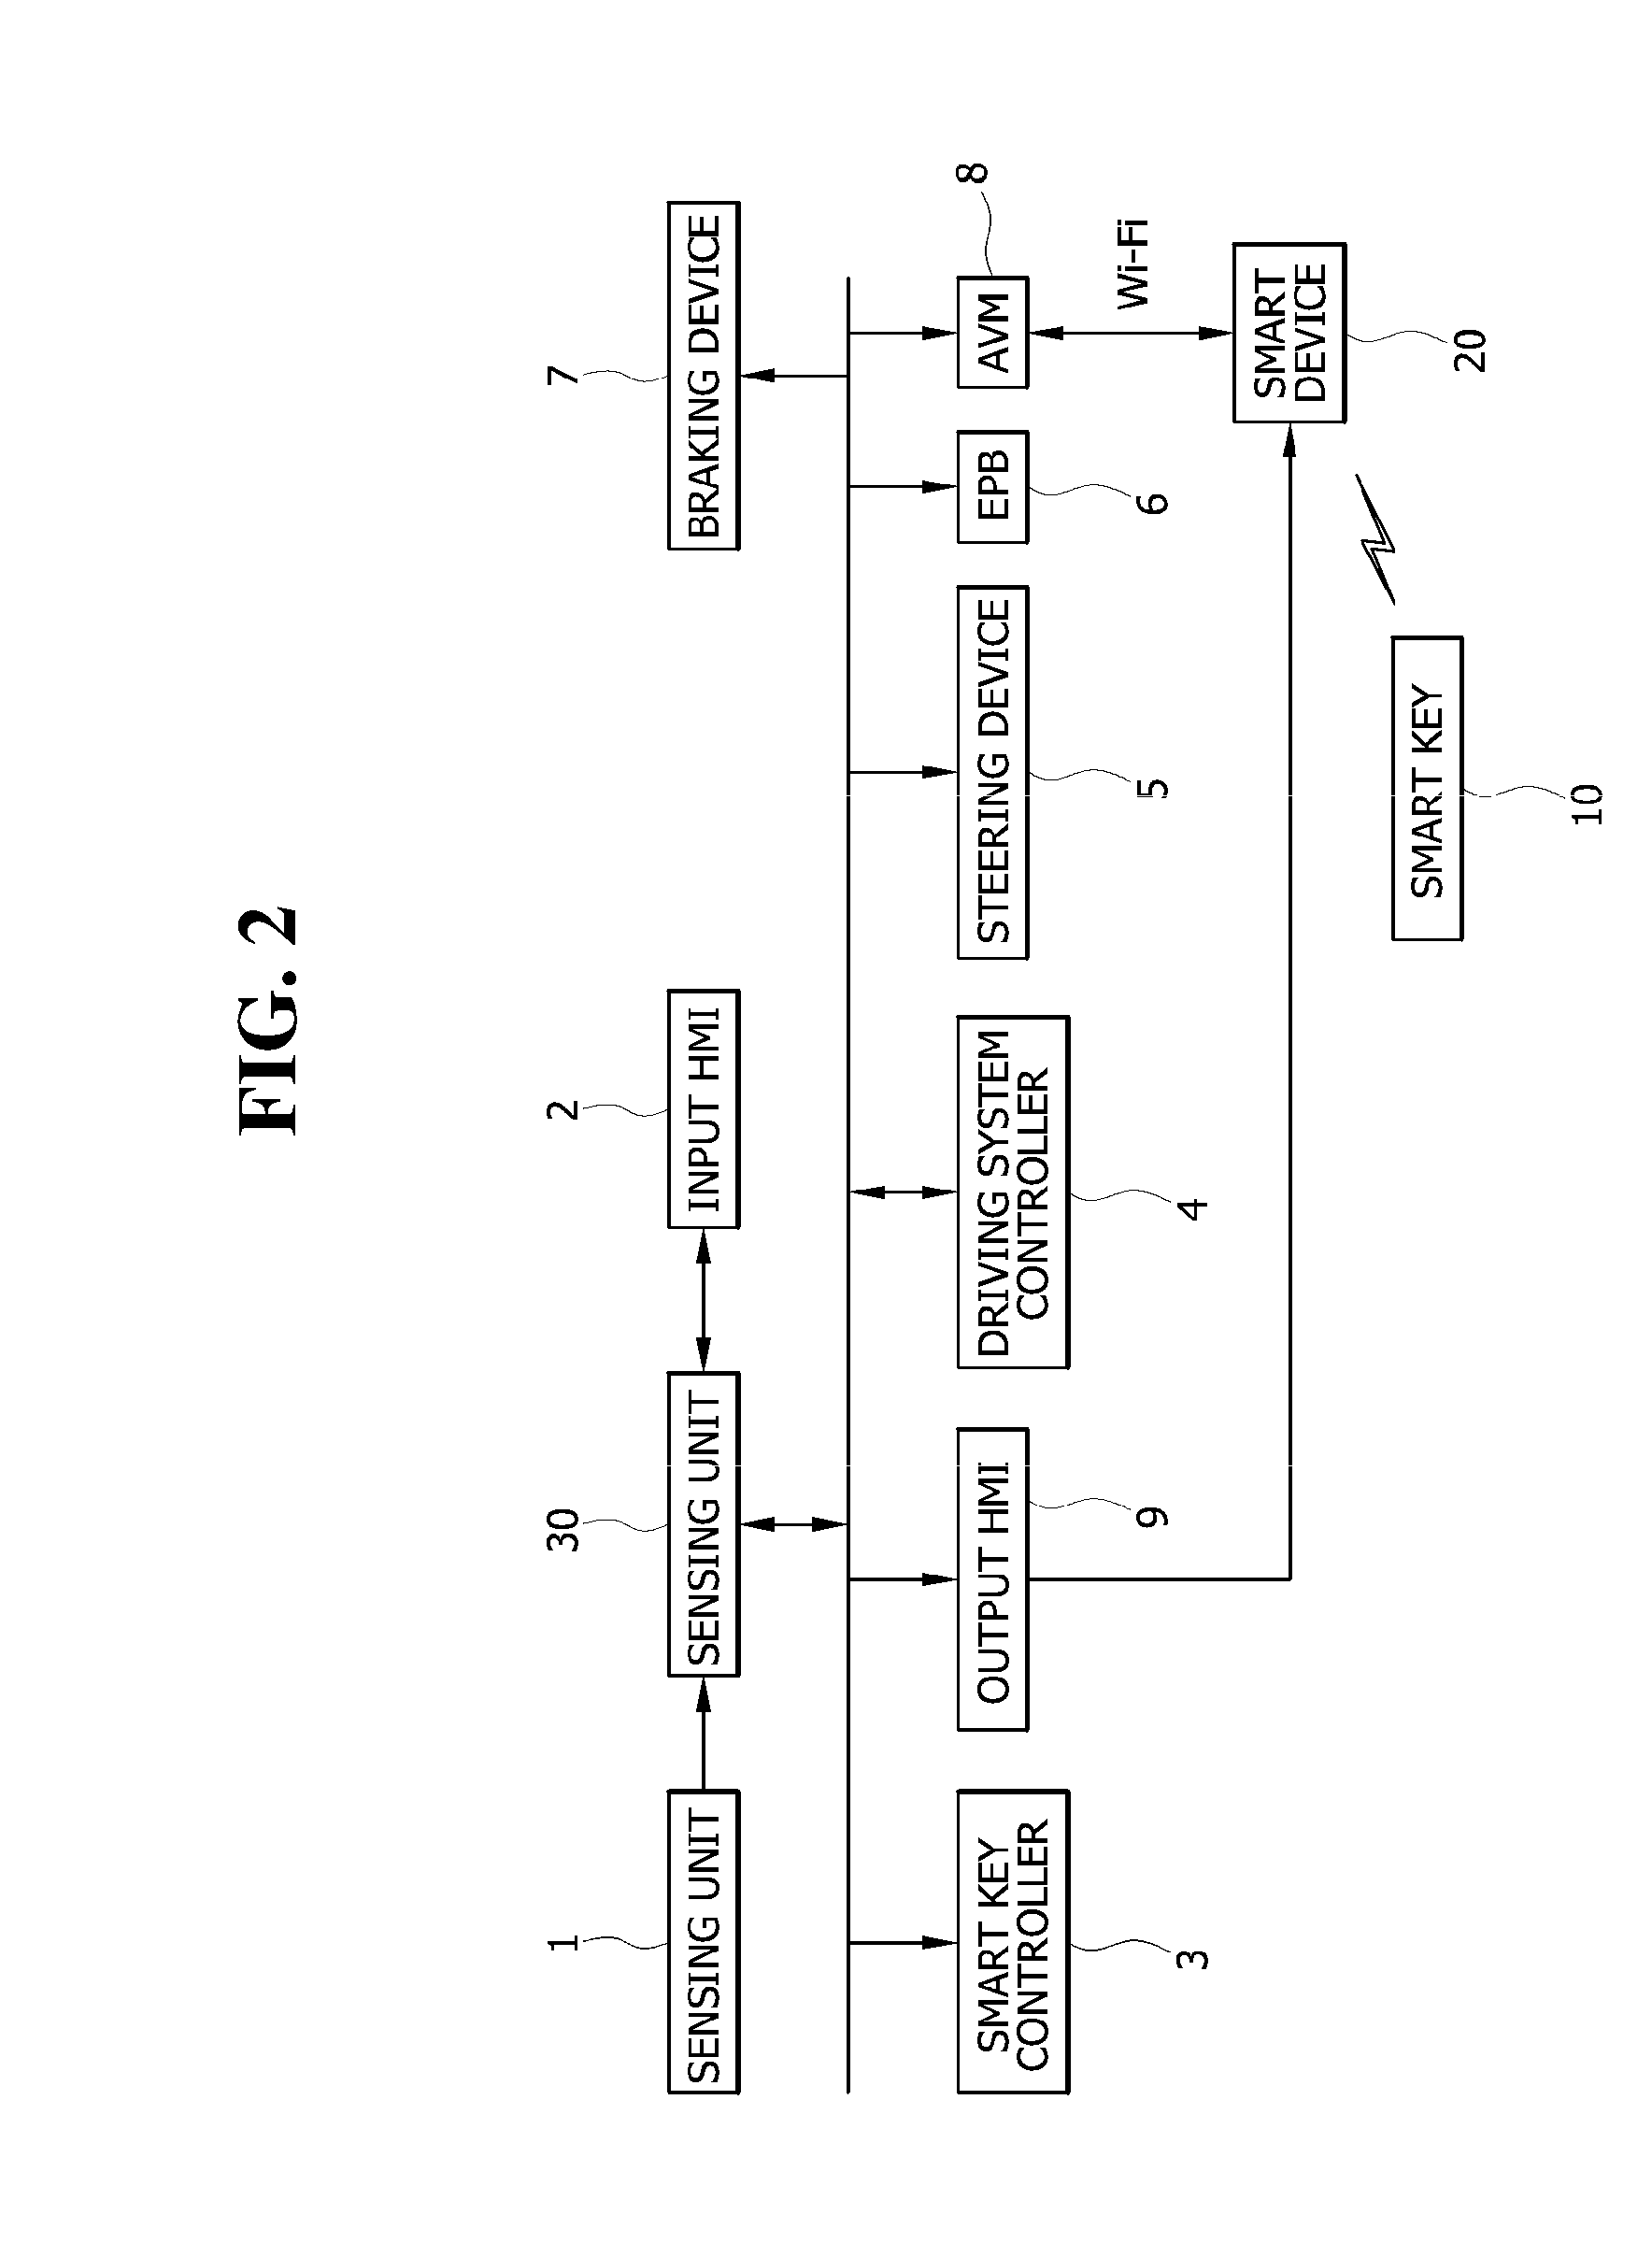 Remote parking control system and control method thereof